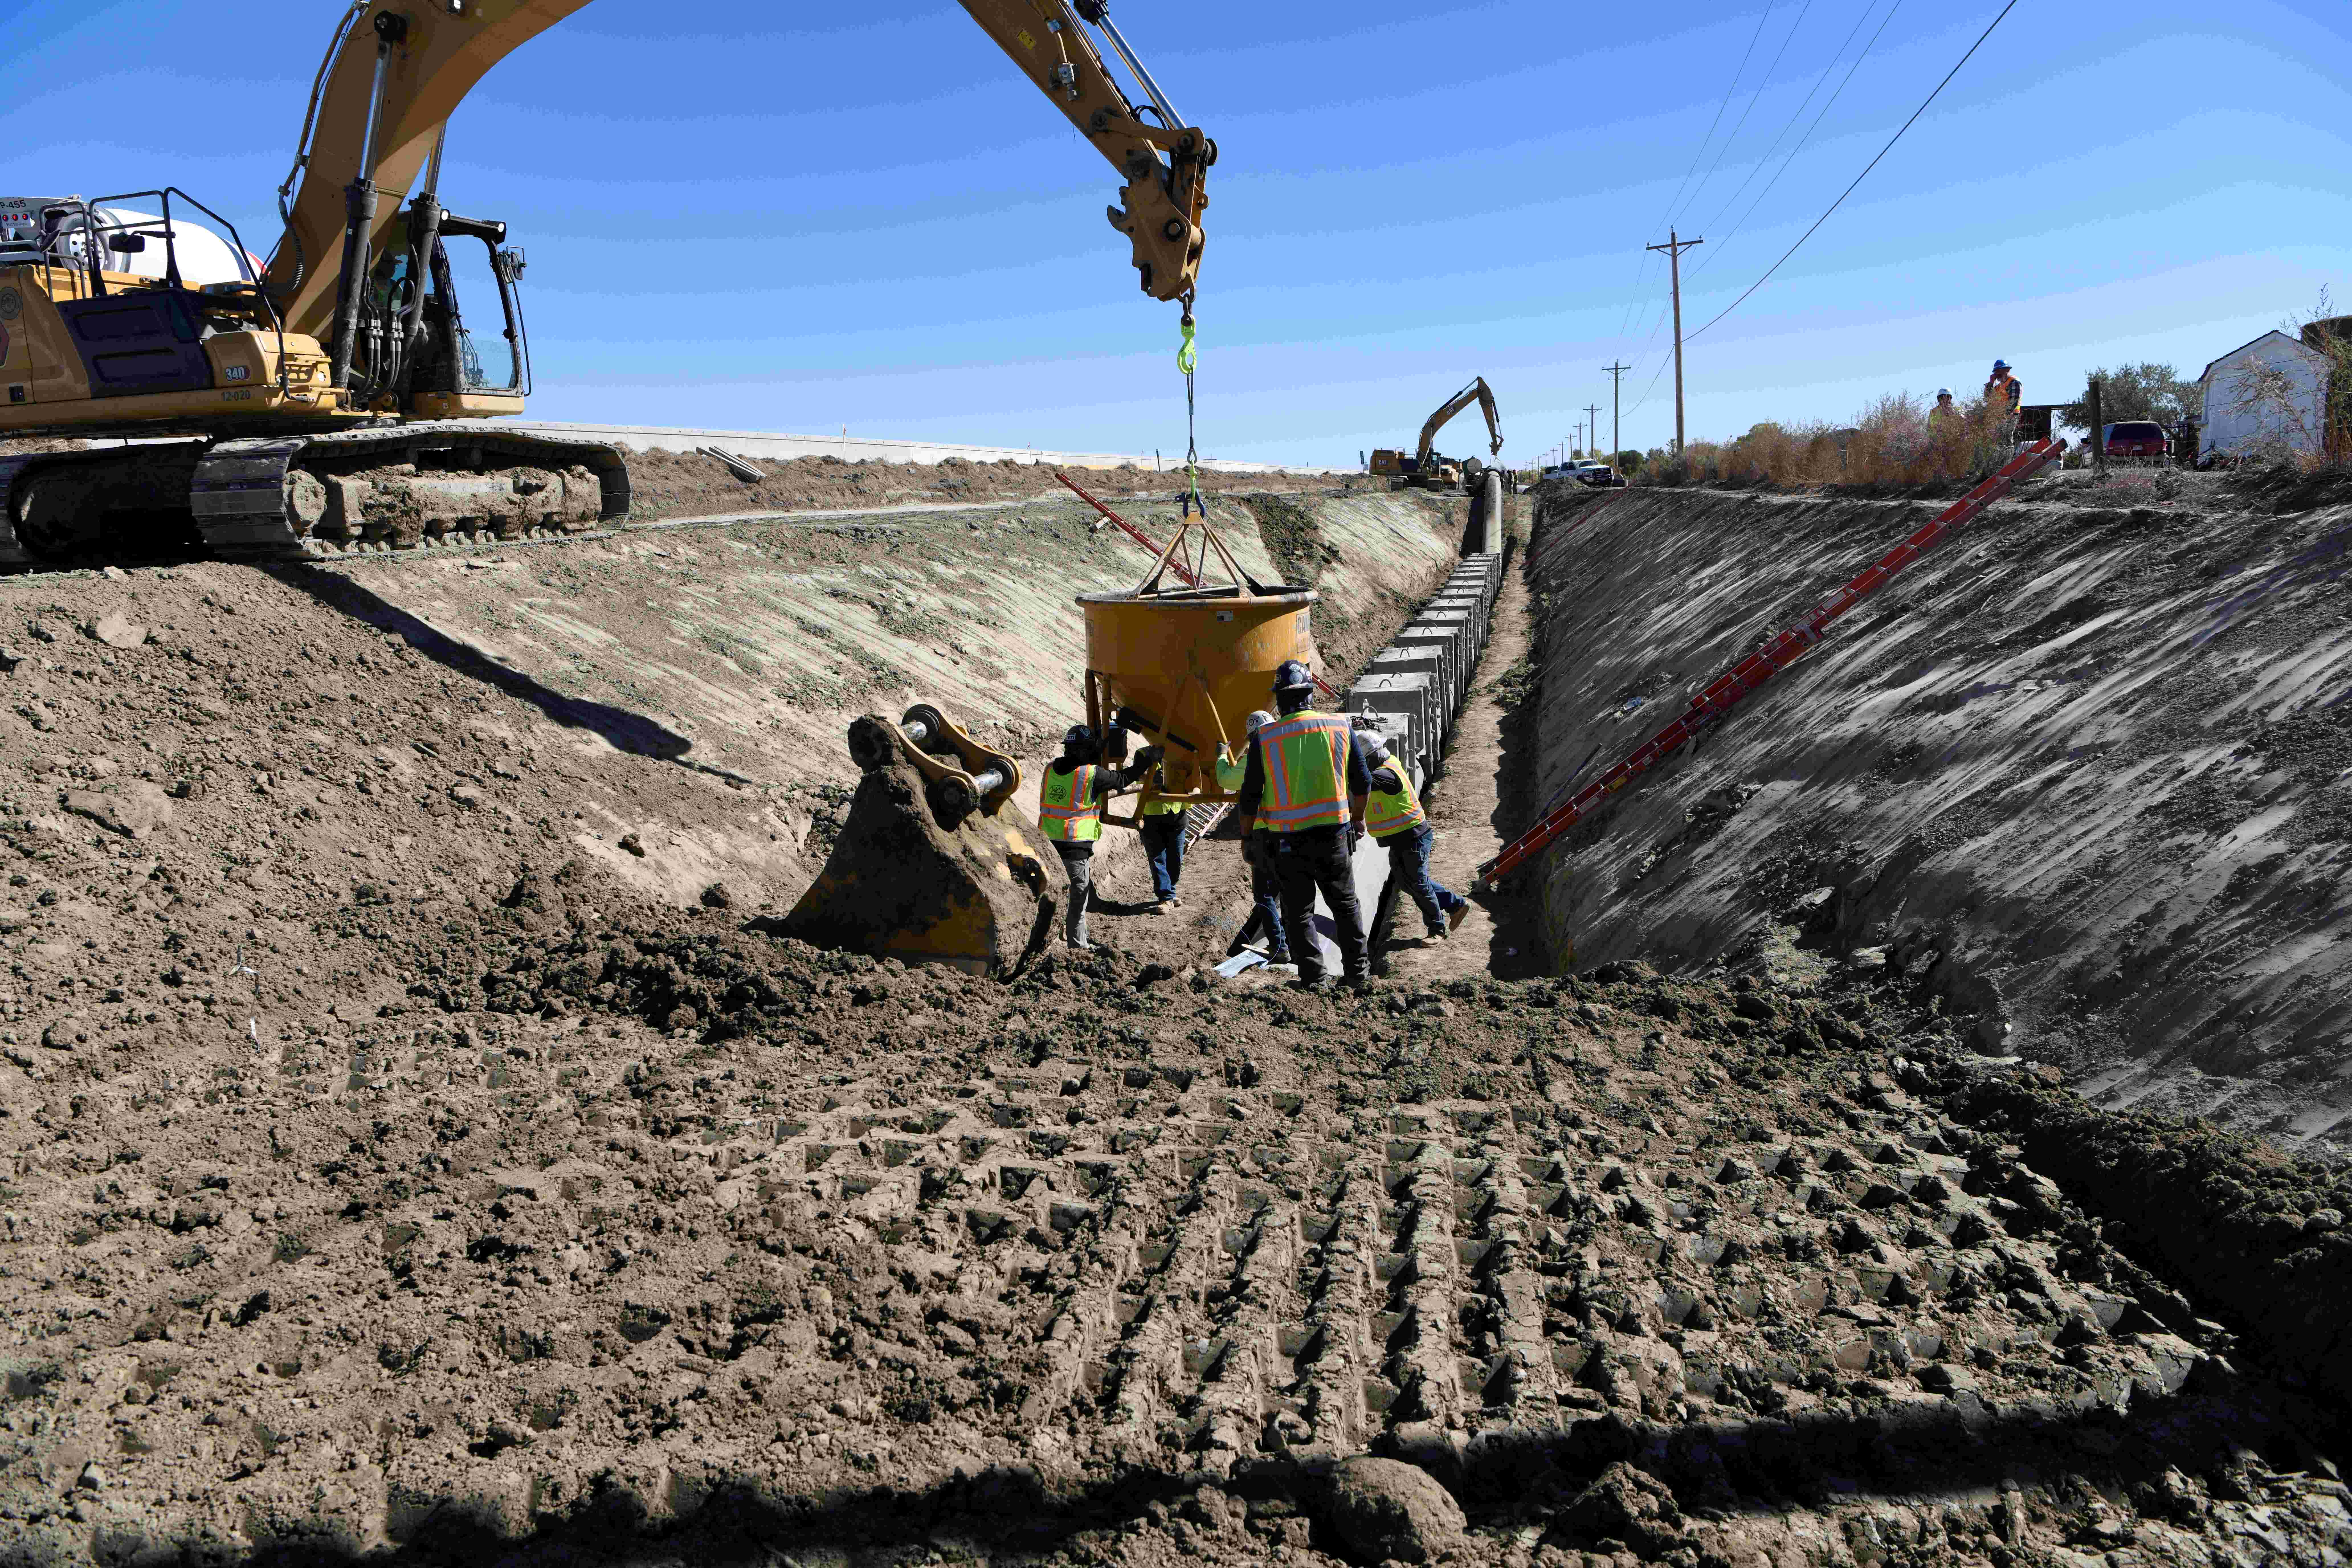 Construction is progresses on the Boone Reach of the Arkansas Valley Conduit Project